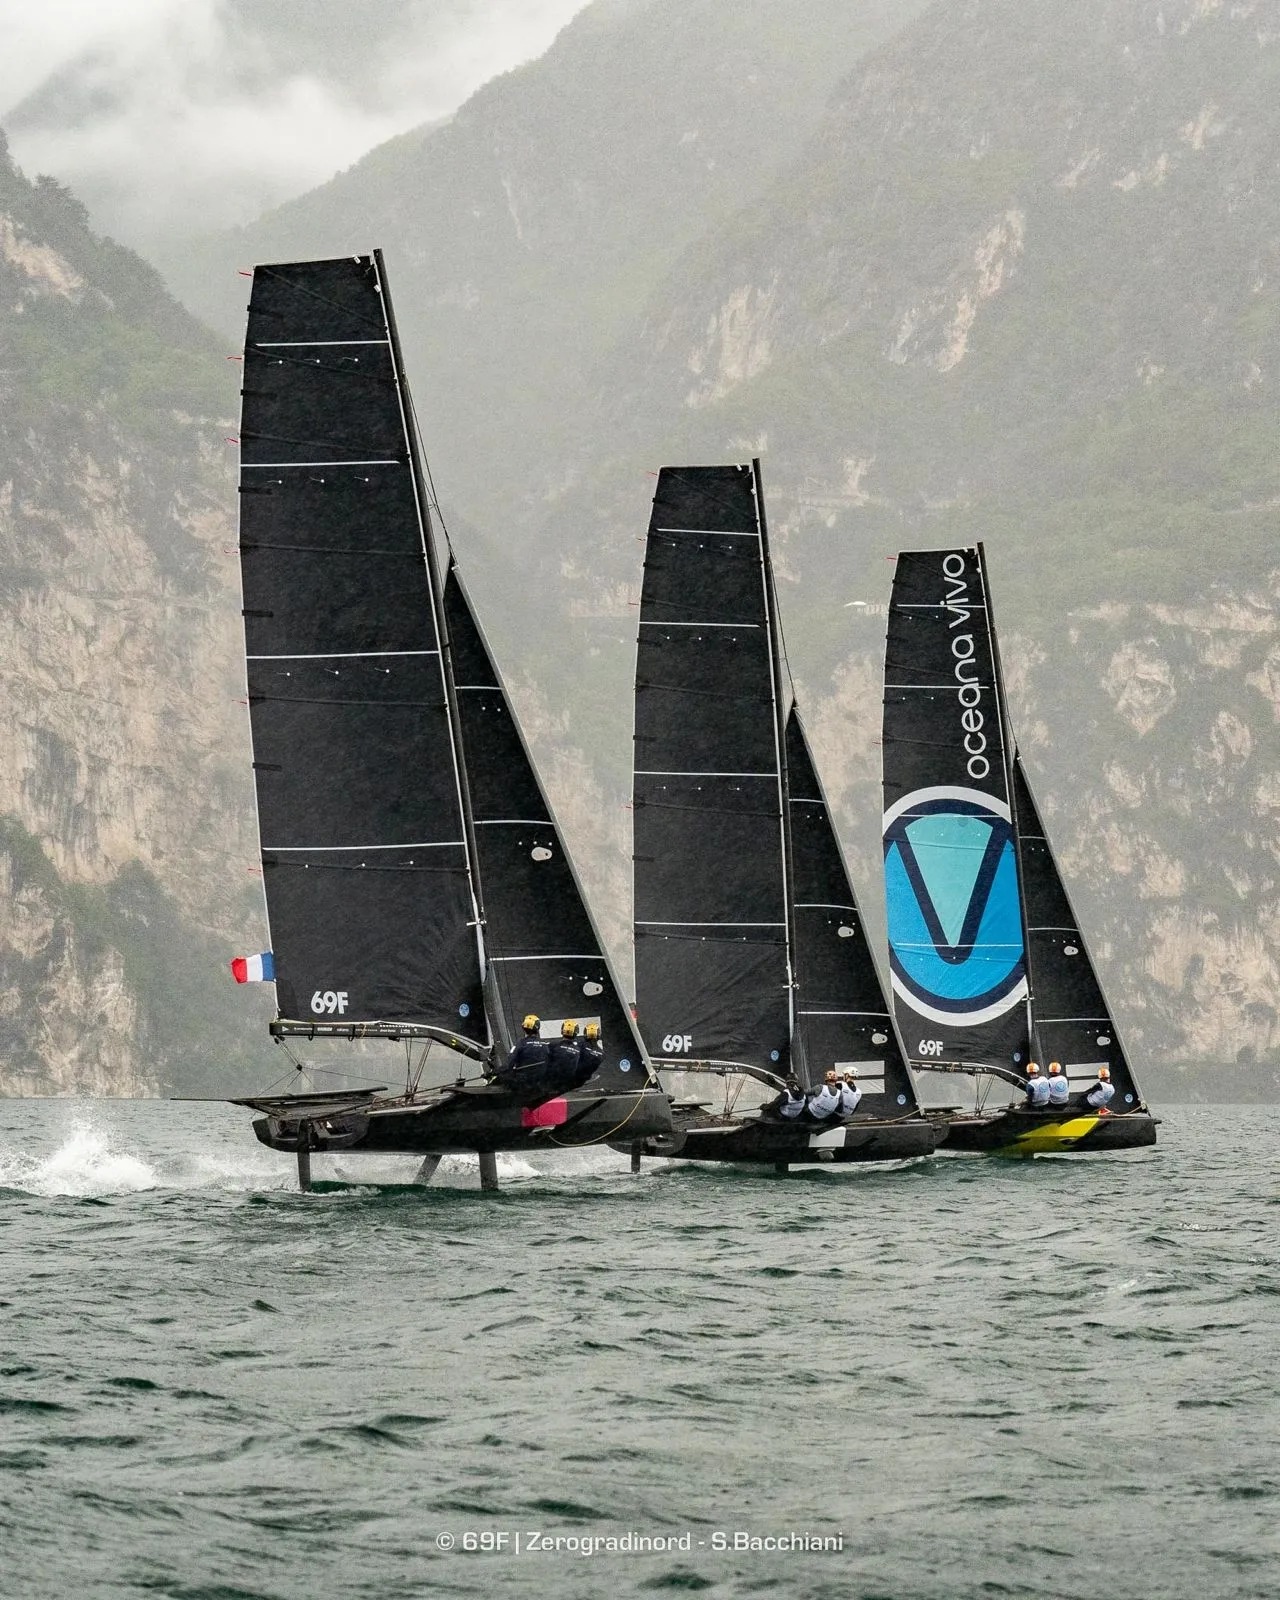  Persico 69F - Youth Gold Cup - Torbole ITA - Day 2